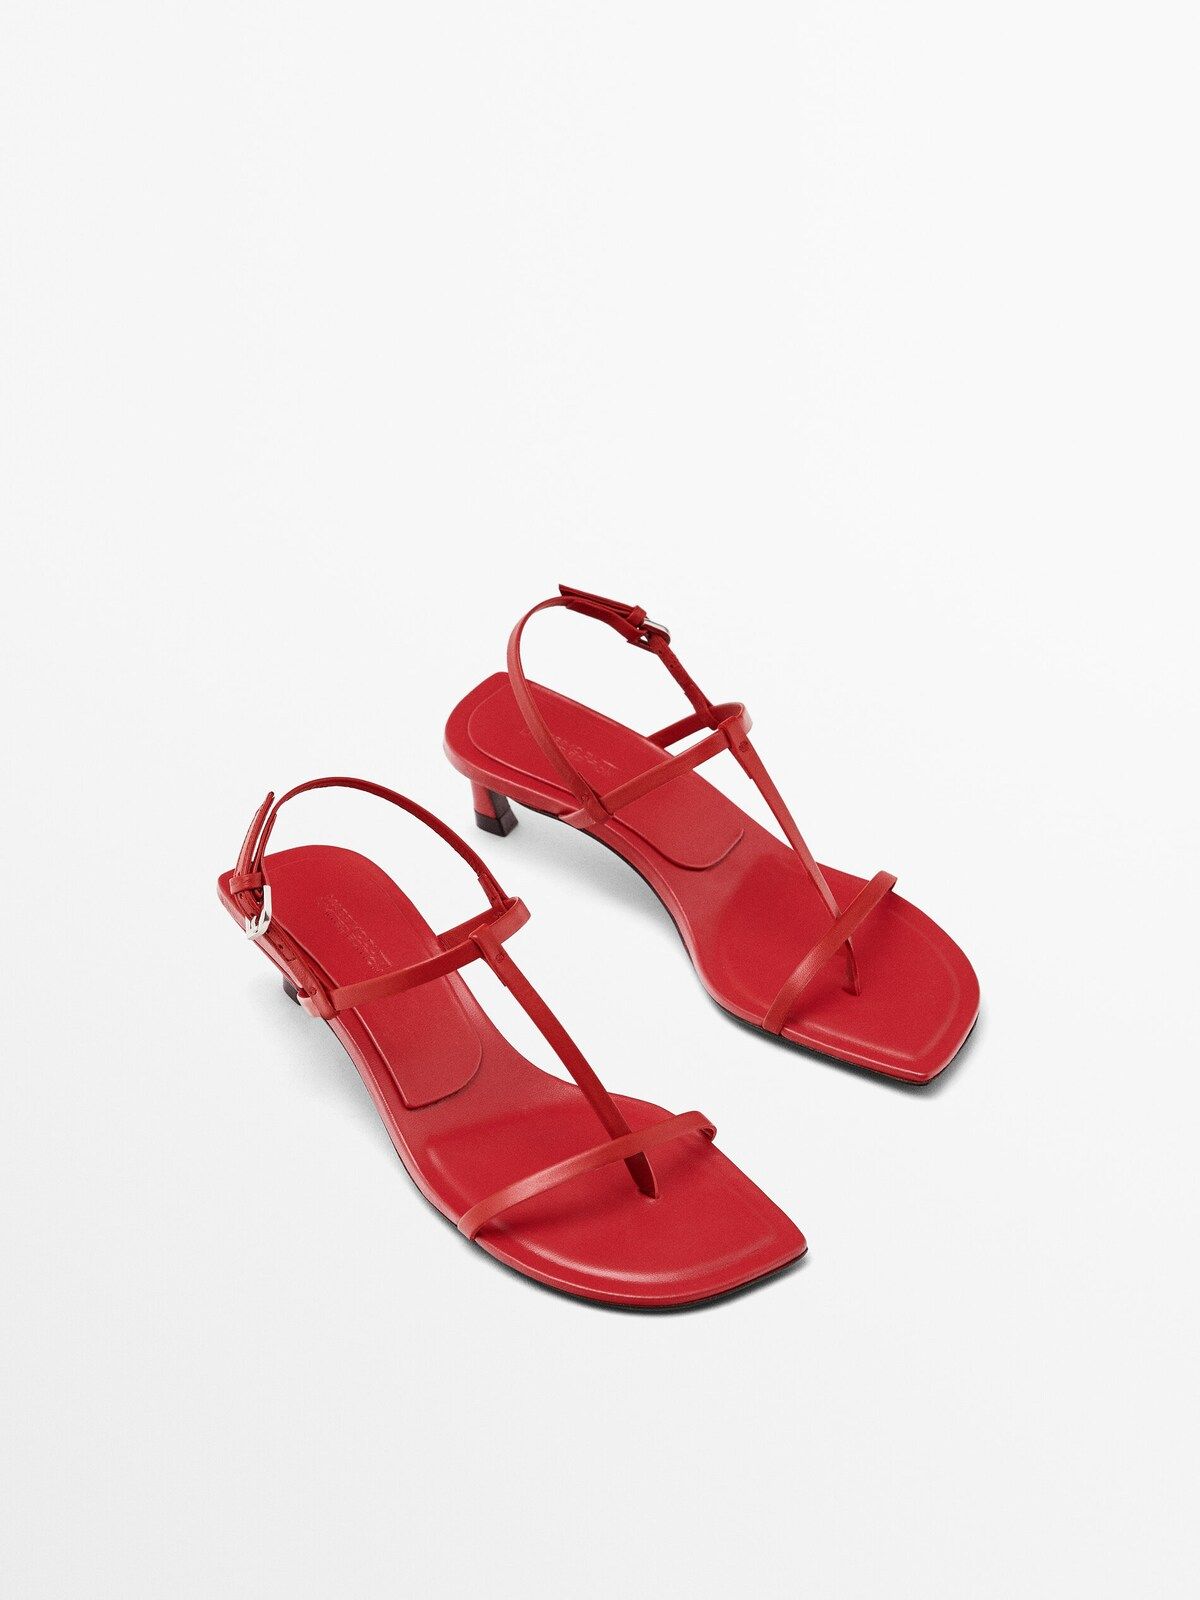 Red heeled sandals - Limited Edition | Massimo Dutti UK